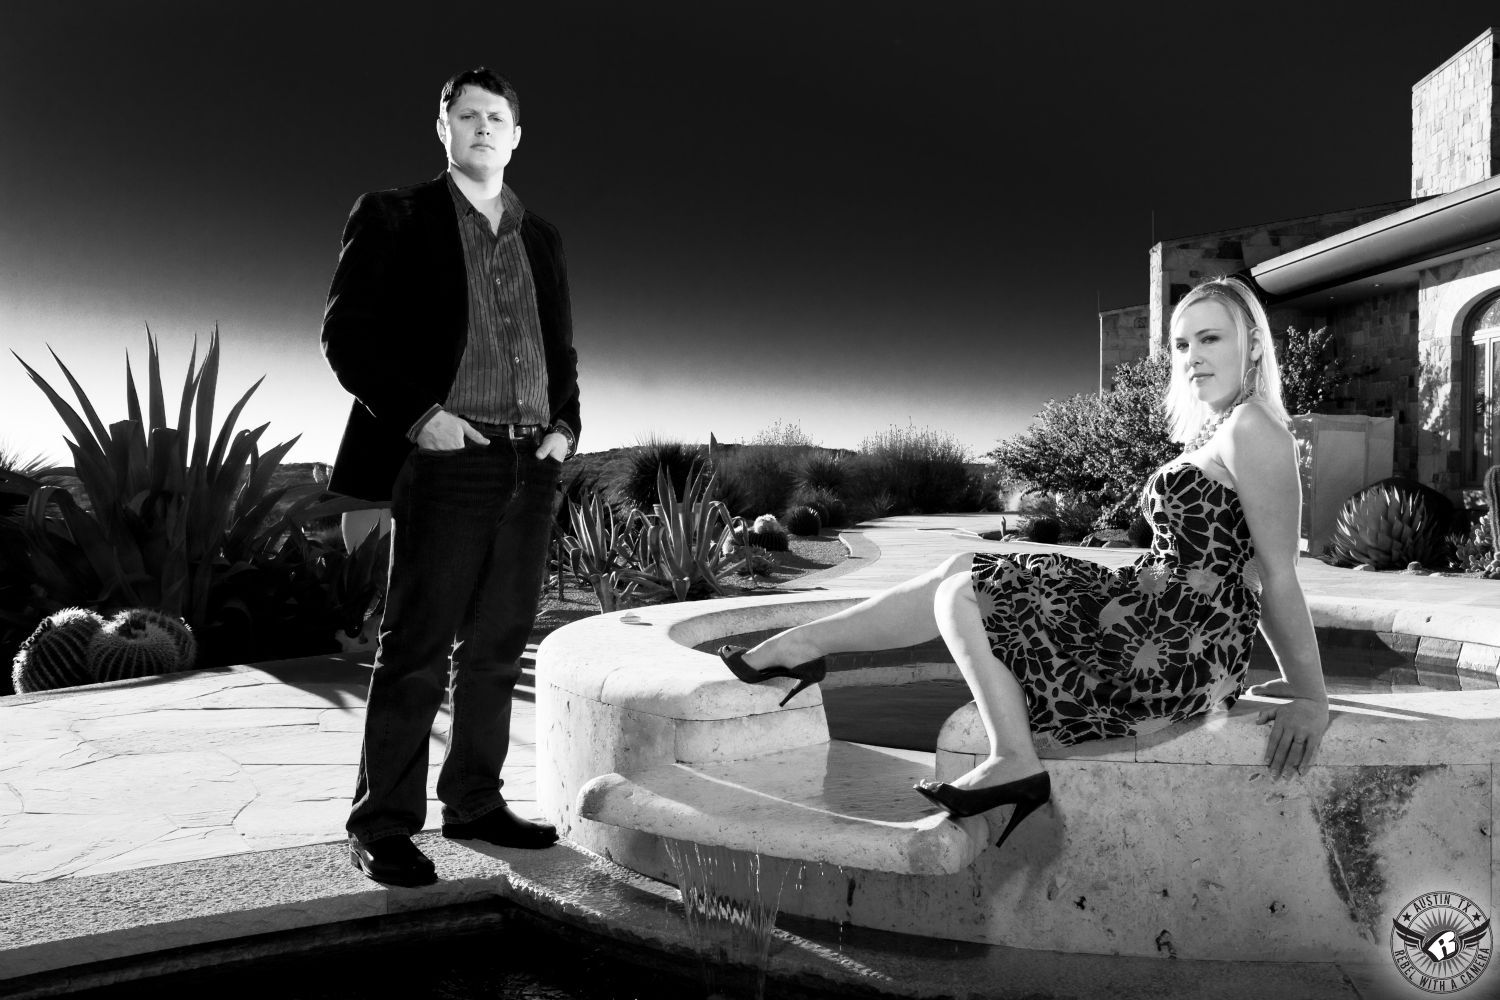 Seductive blond girl in flower print knee length black and white dress with black high heels sits on the edge of a stone fountain near a stoic guy with dark hair wearing a dark sport coat over a grey shirt with dark slacks on a stone poolside walkway in front of cactus and a big dark sky in this engagement photo in Dripping Springs Texas.  